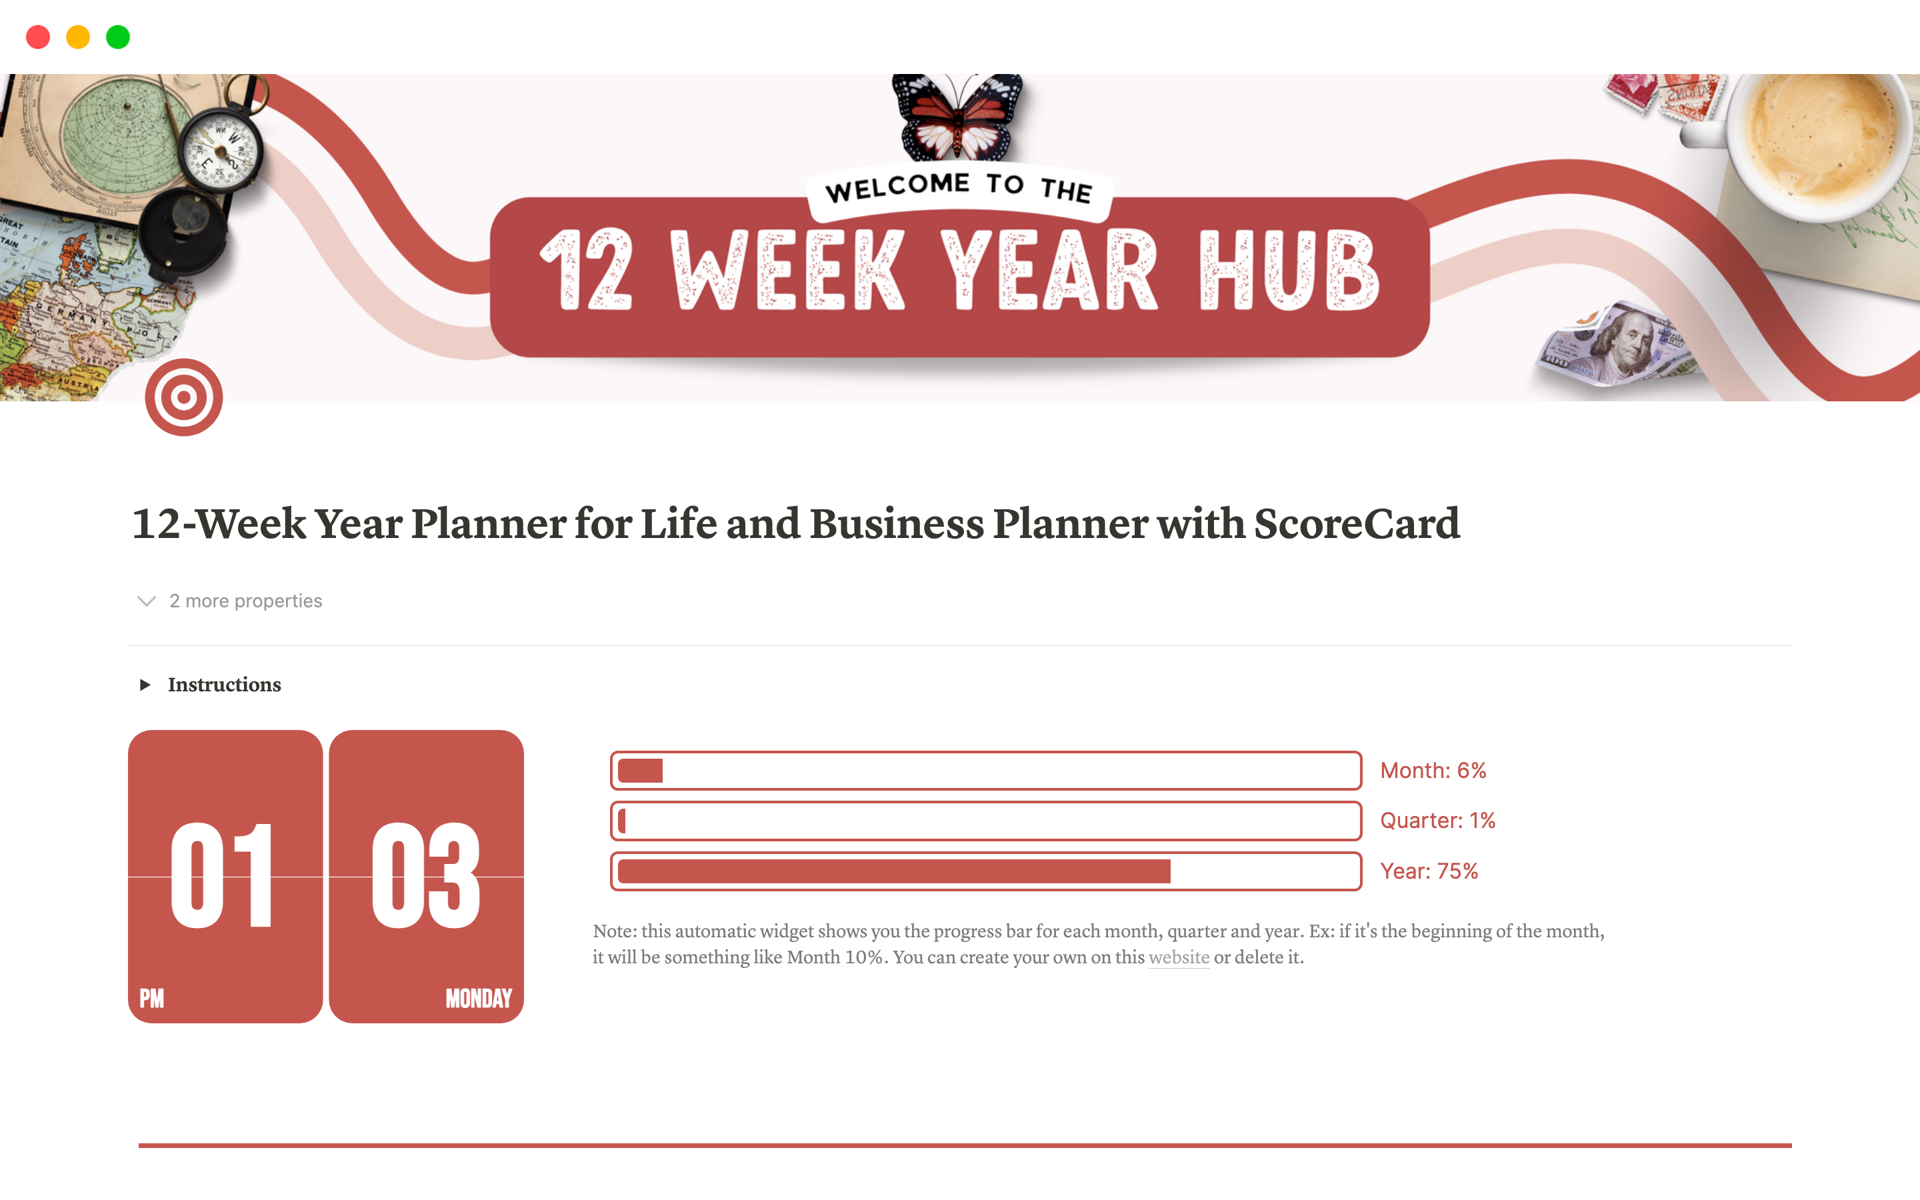 Get more done in 12 weeks than others do in a year using this 12-week Planner. 